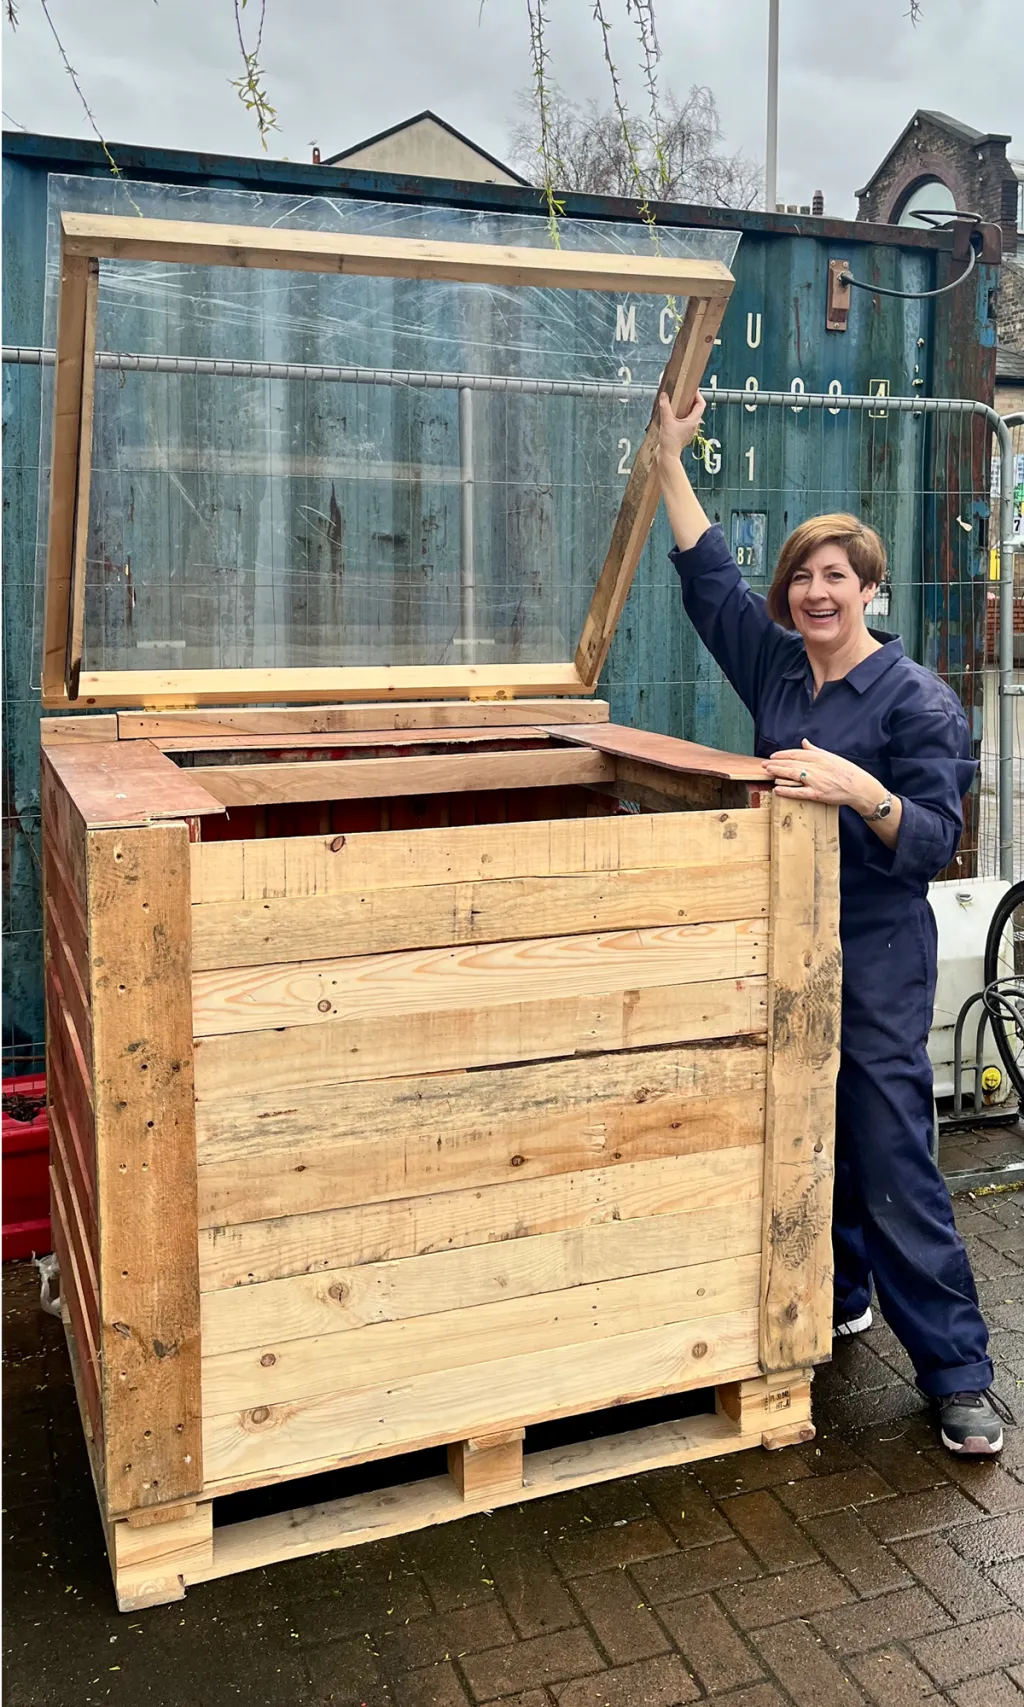 The first compost bin